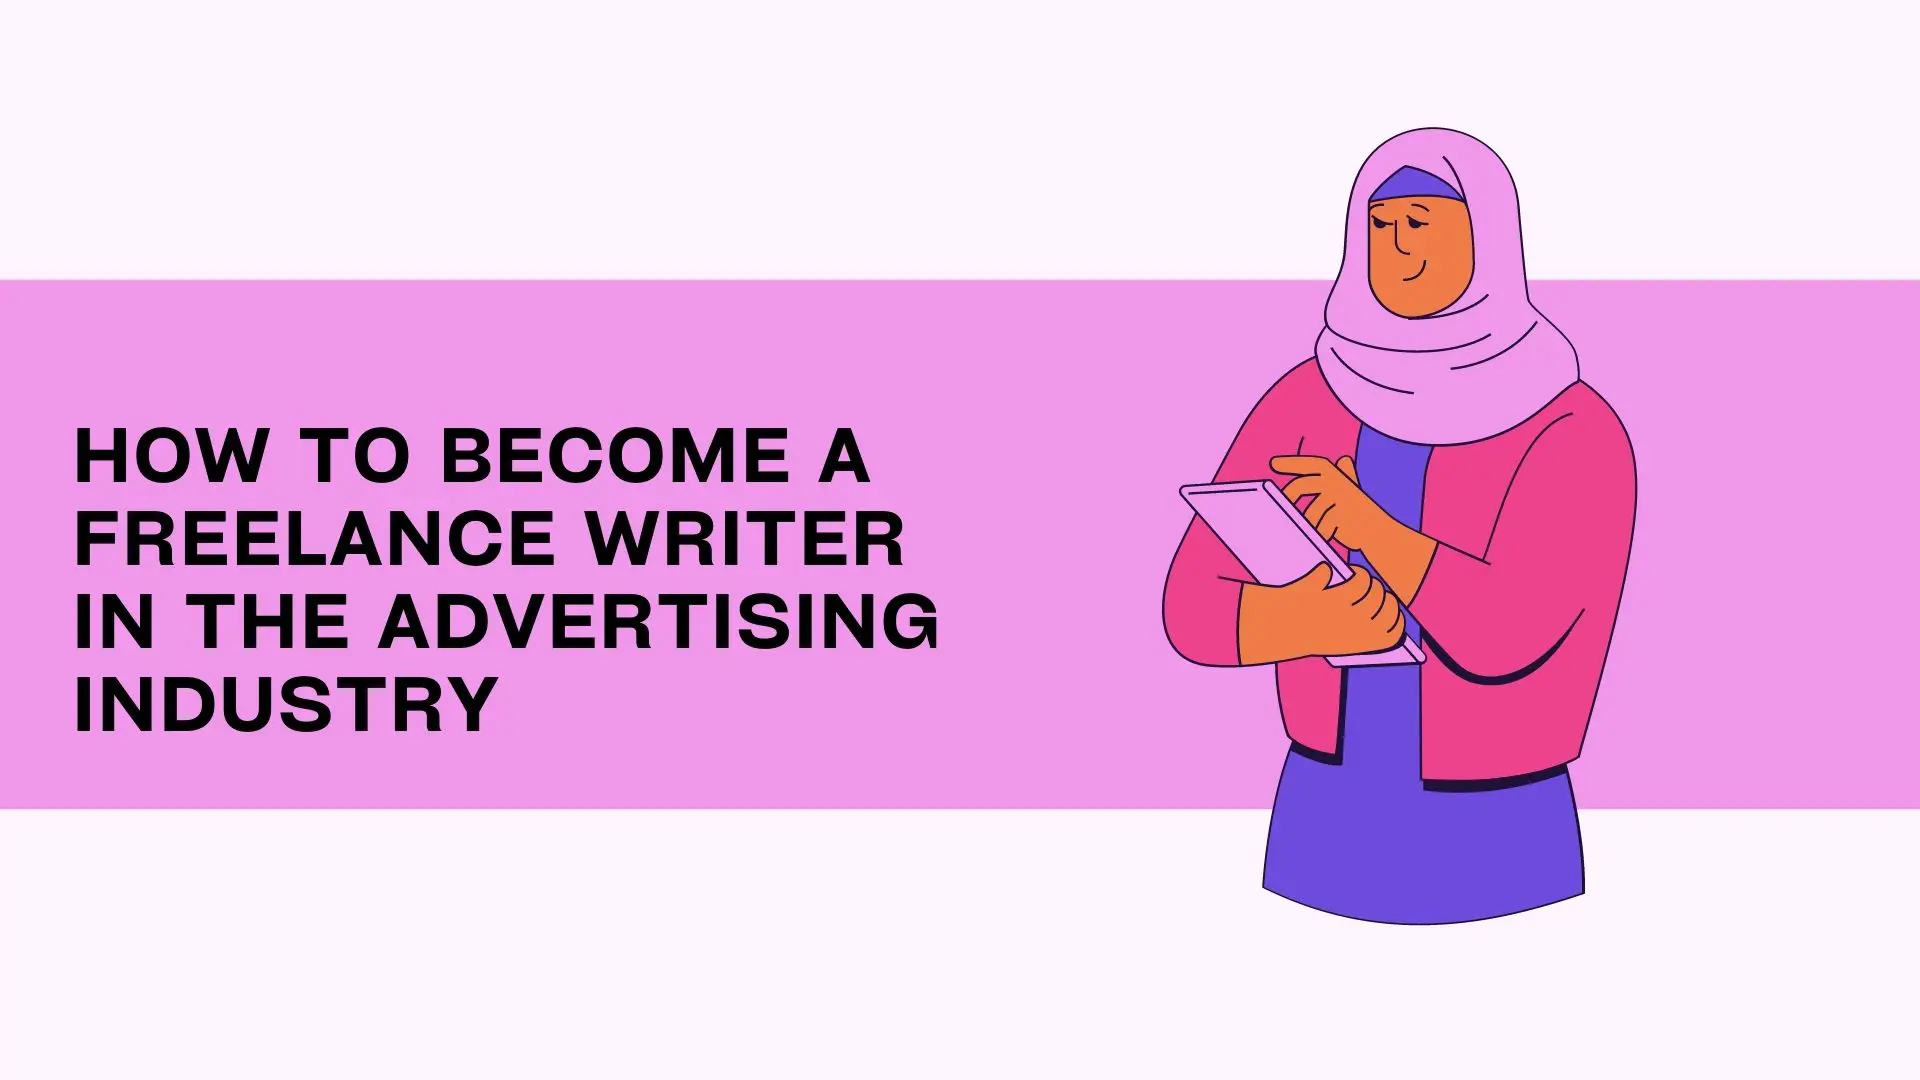 How To Become A Freelance Writer In The Advertising Industry